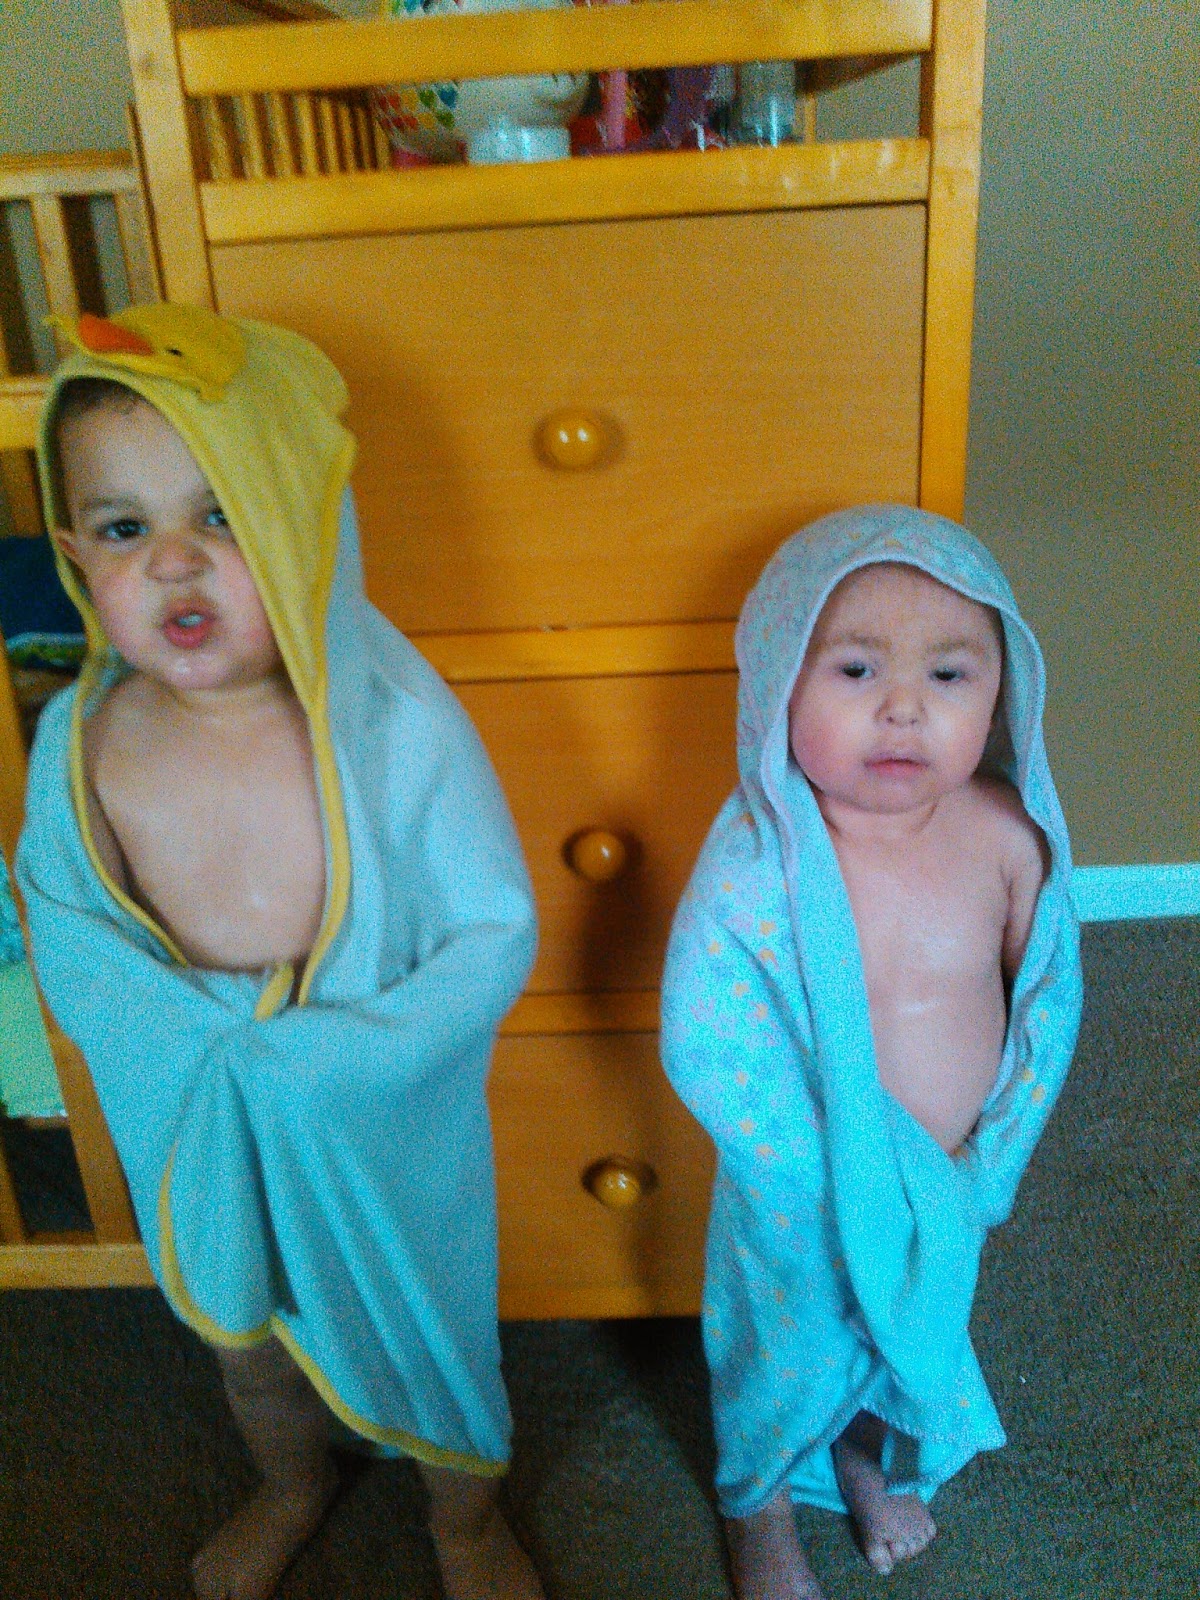 Brooklyn, who has ichthyosis,with her brother after a bath